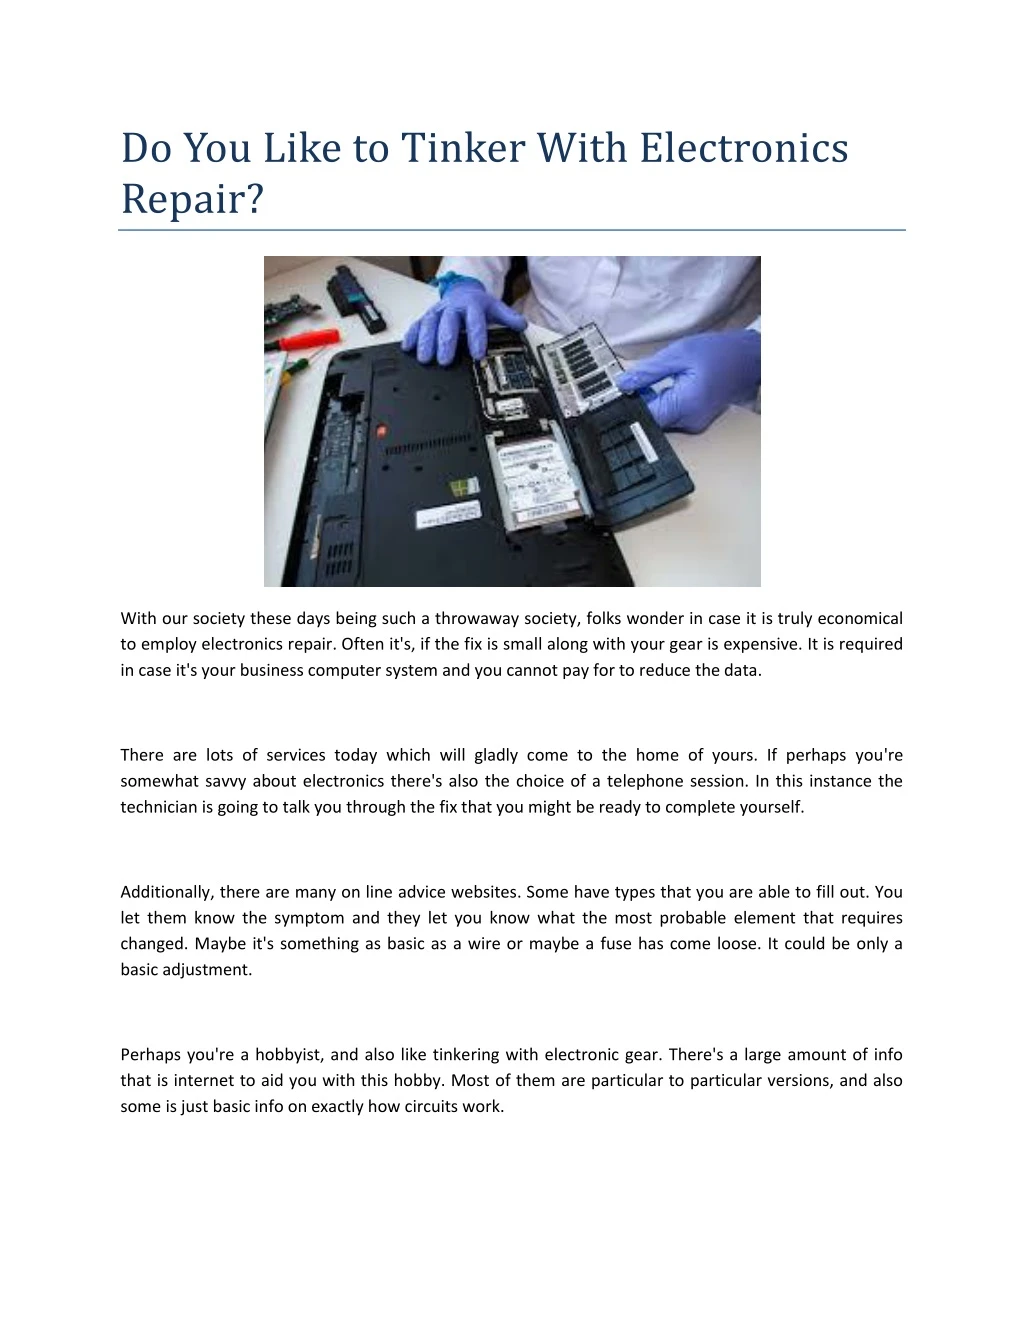 do you like to tinker with electronics repair